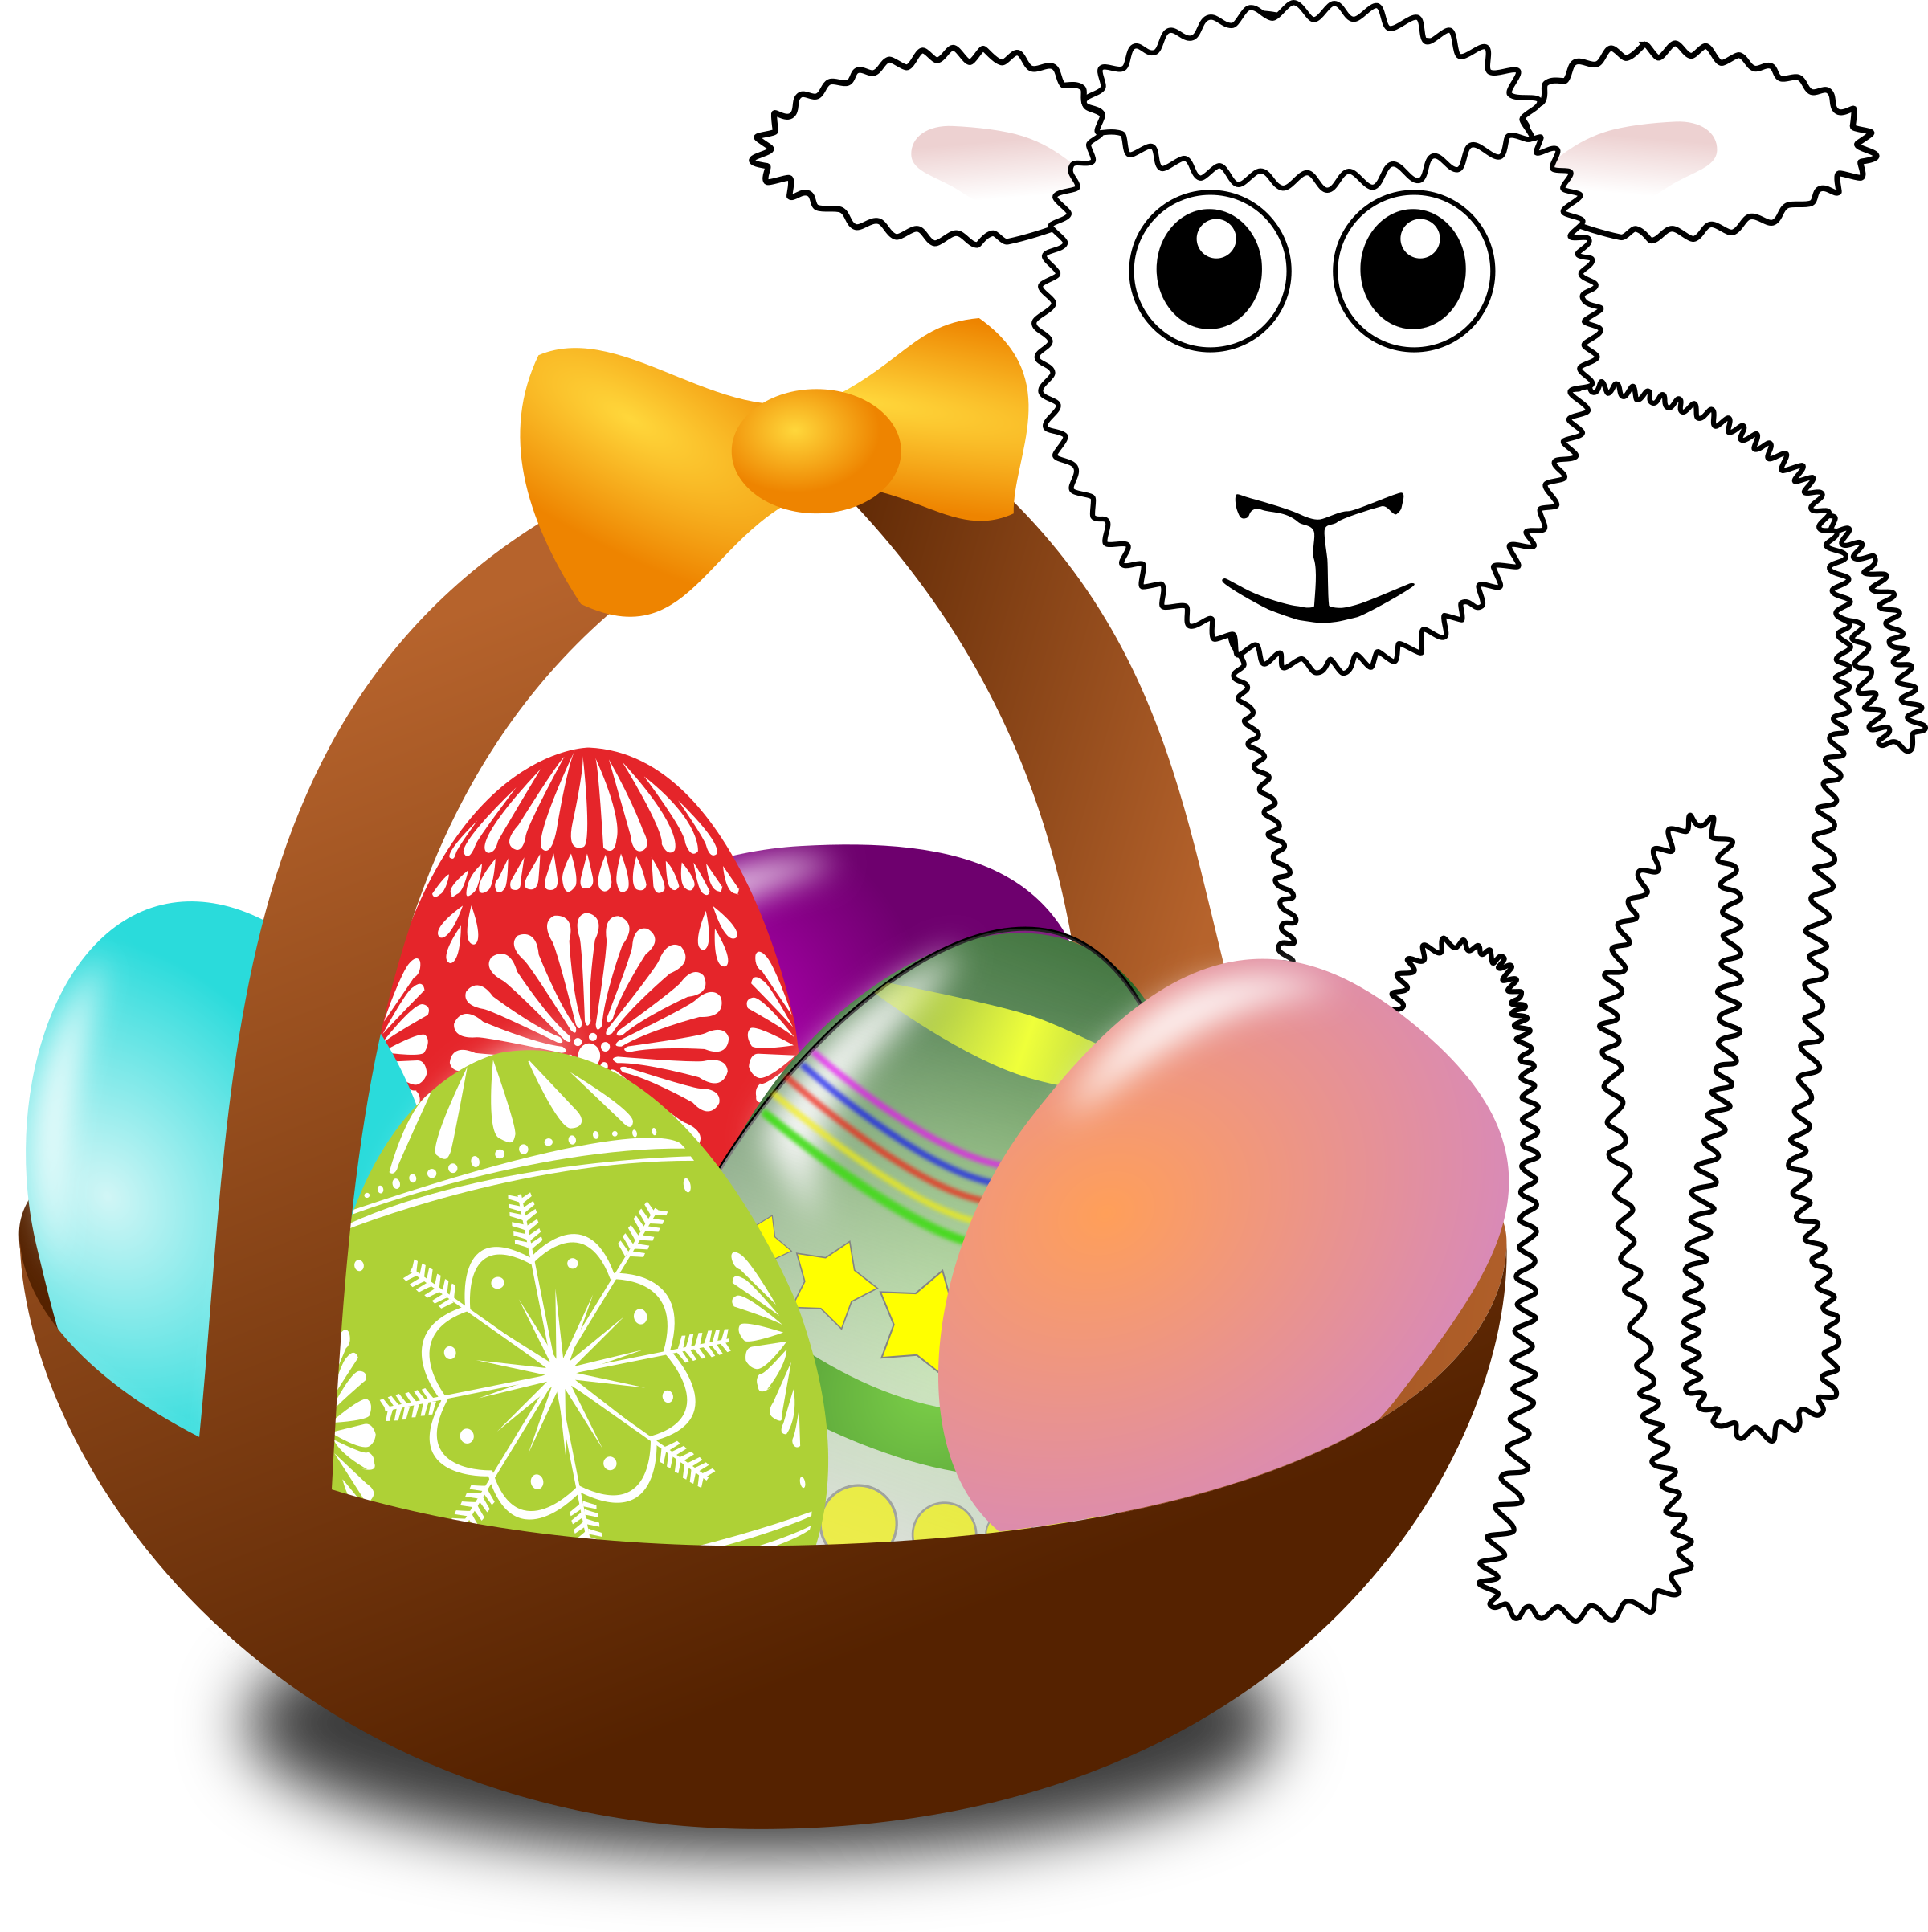 Funny Lamb With Easter Eggs In A Basket By Palomaironique